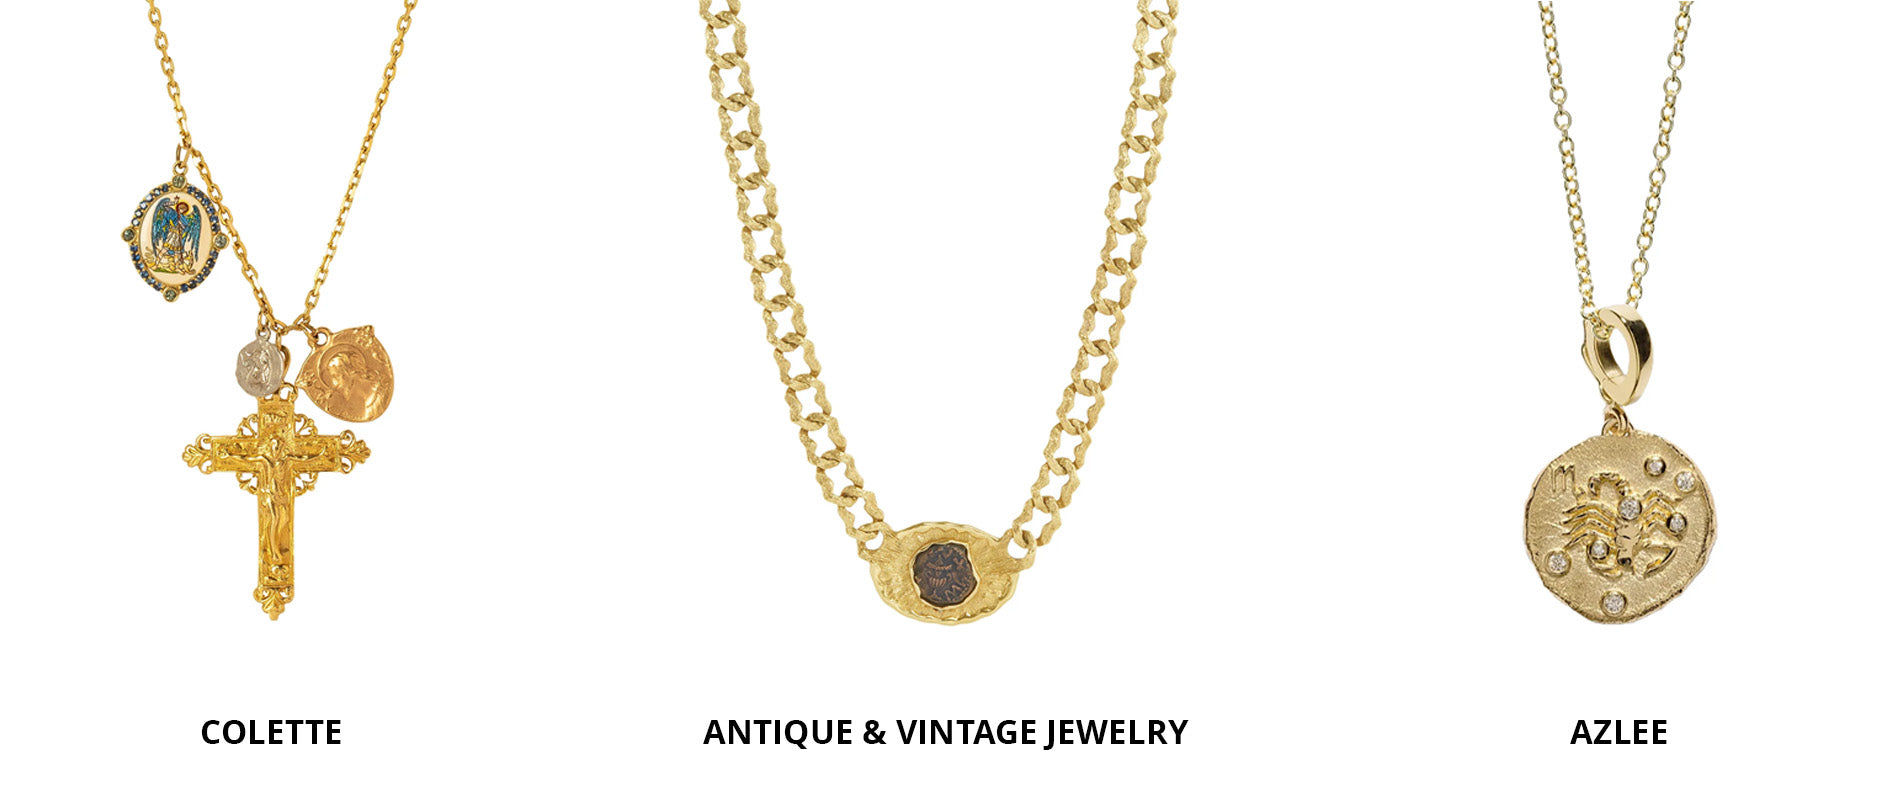 Broken English Jewelry - Laura's Picks: Coin Operated, Shop coin necklaces from Colette, Azlee, Antique & Vintage Jewelry